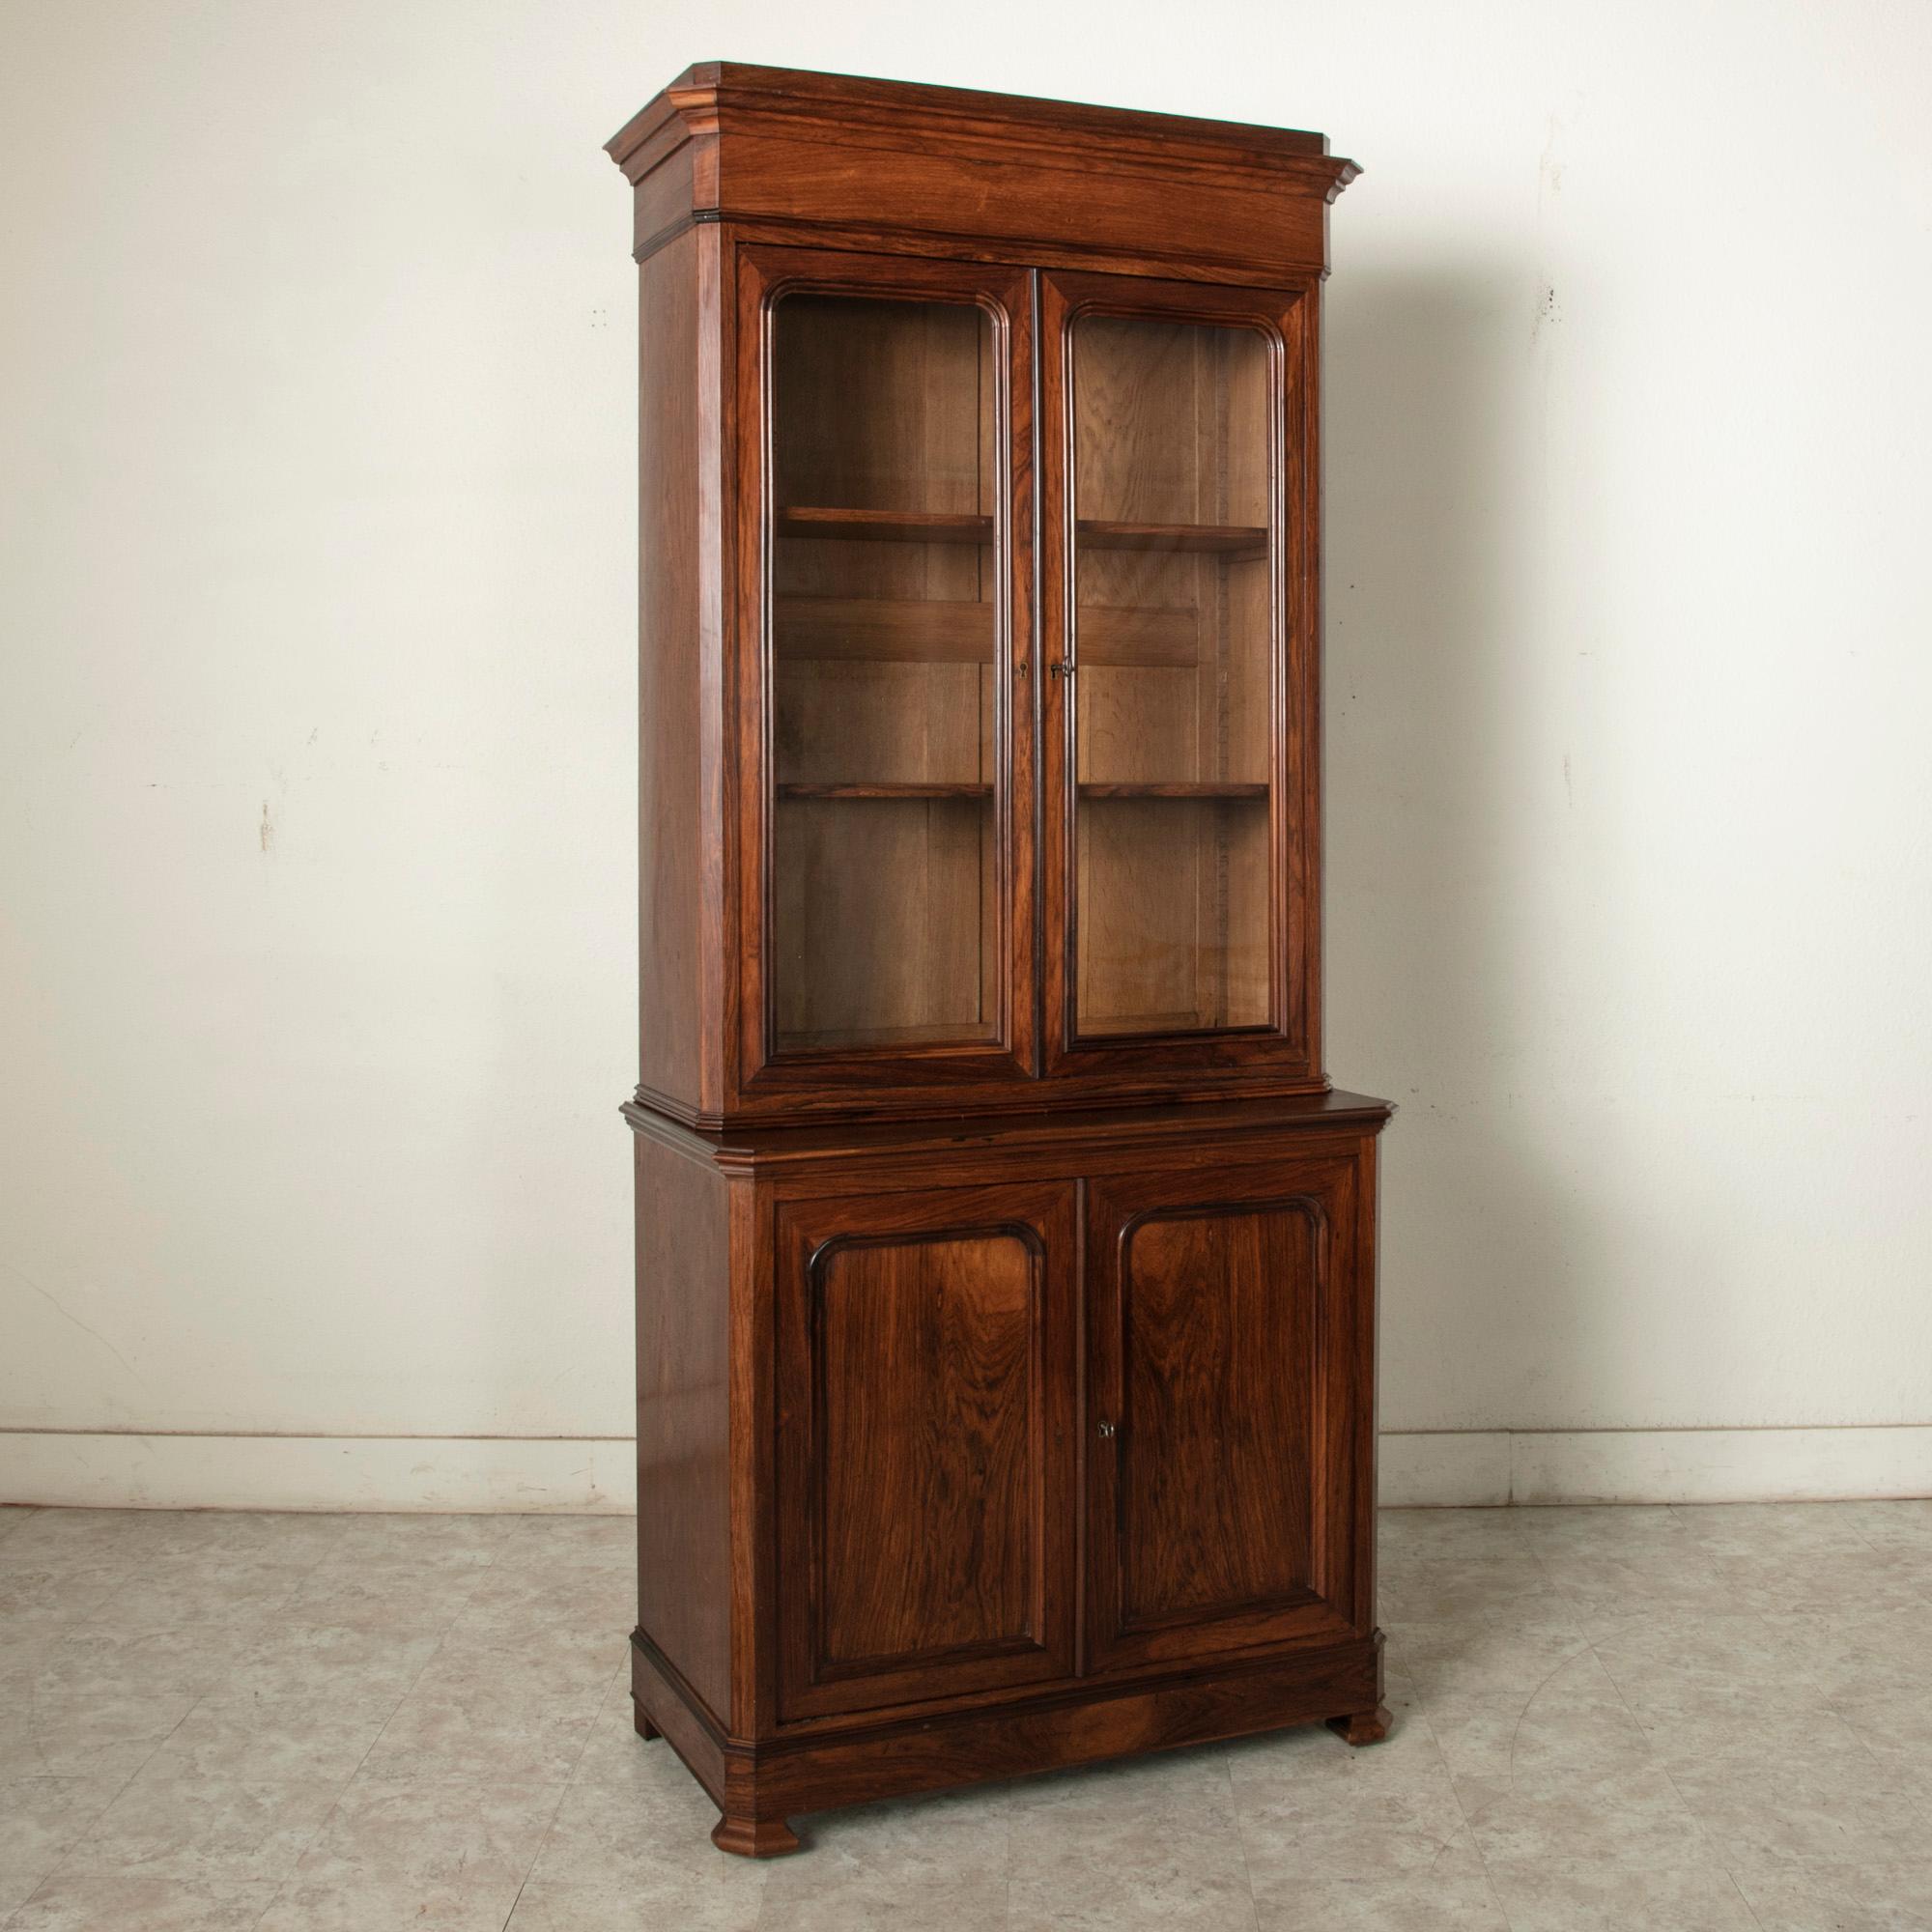 This 19th century French Louis Philippe period buffet deux corps or bookcase is constructed of palisander and features clean simple lines. Of an unusual size with its narrow width of 40 inches, its upper cabinet is fitted with glass doors and